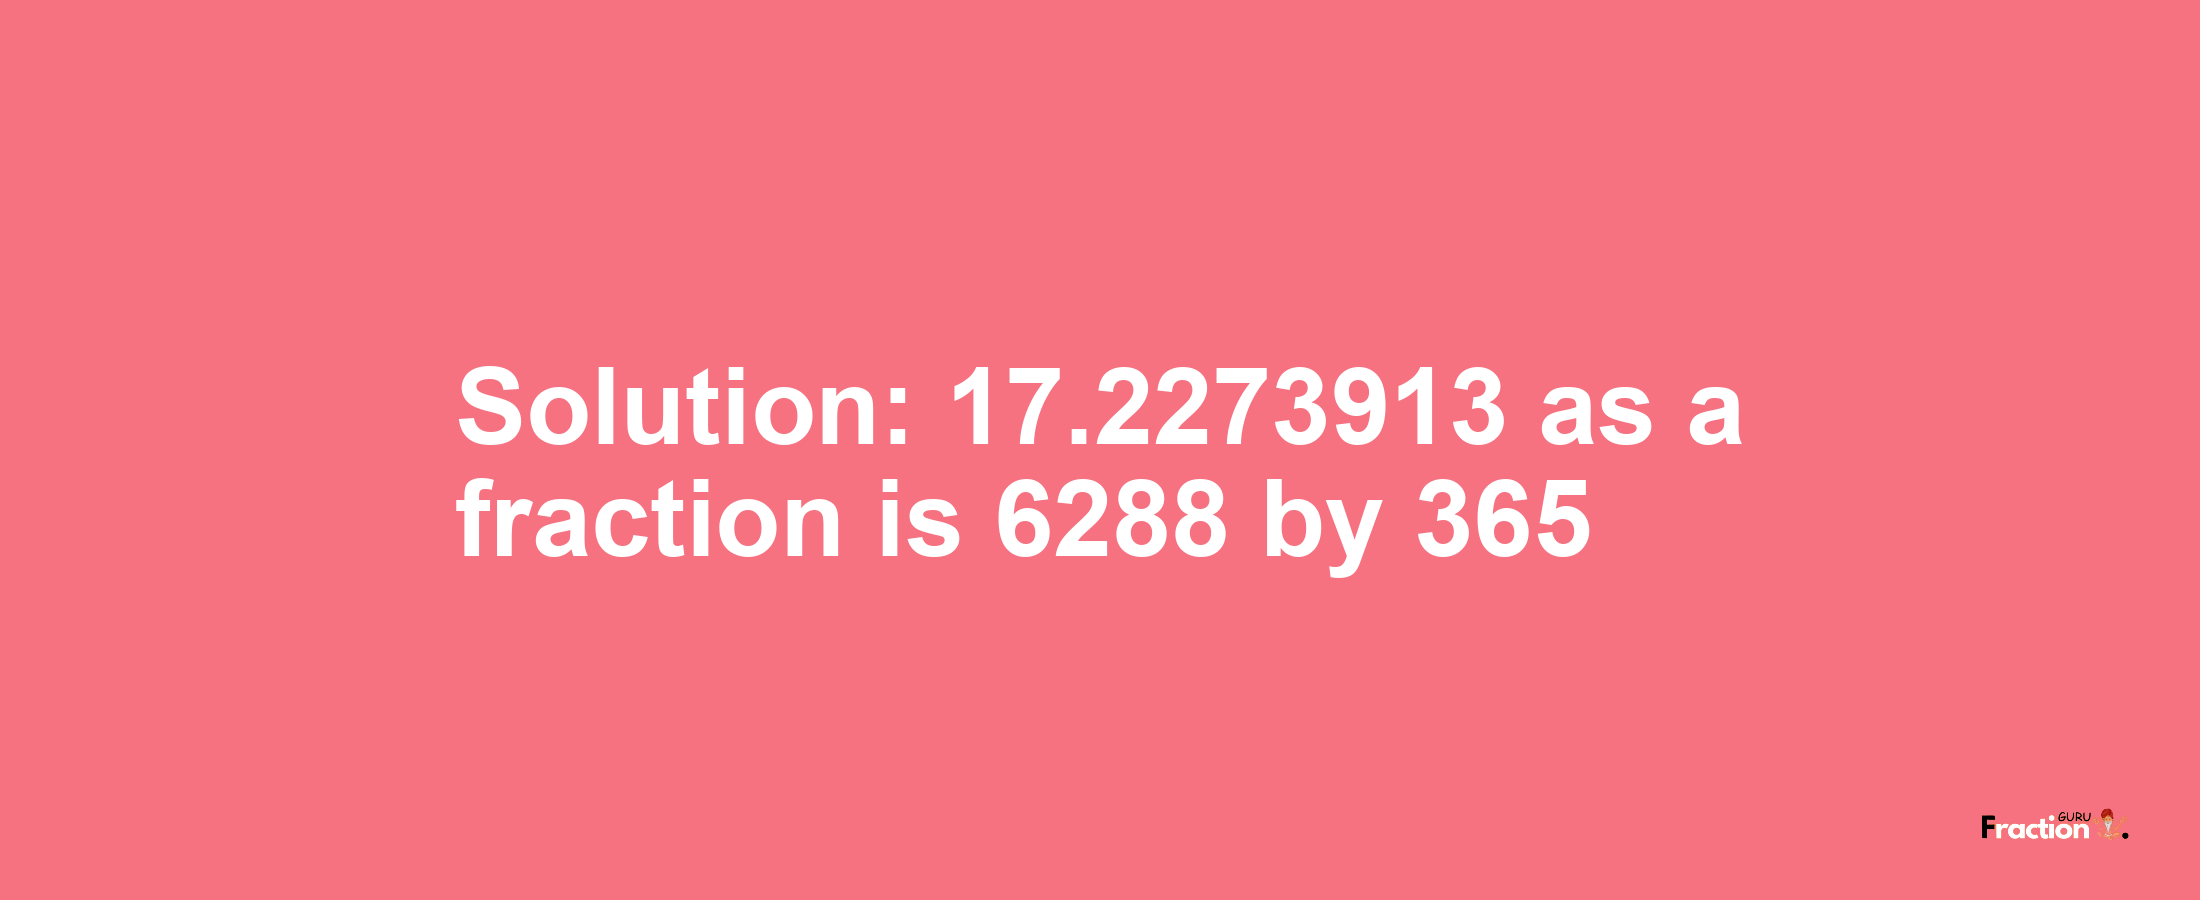 Solution:17.2273913 as a fraction is 6288/365